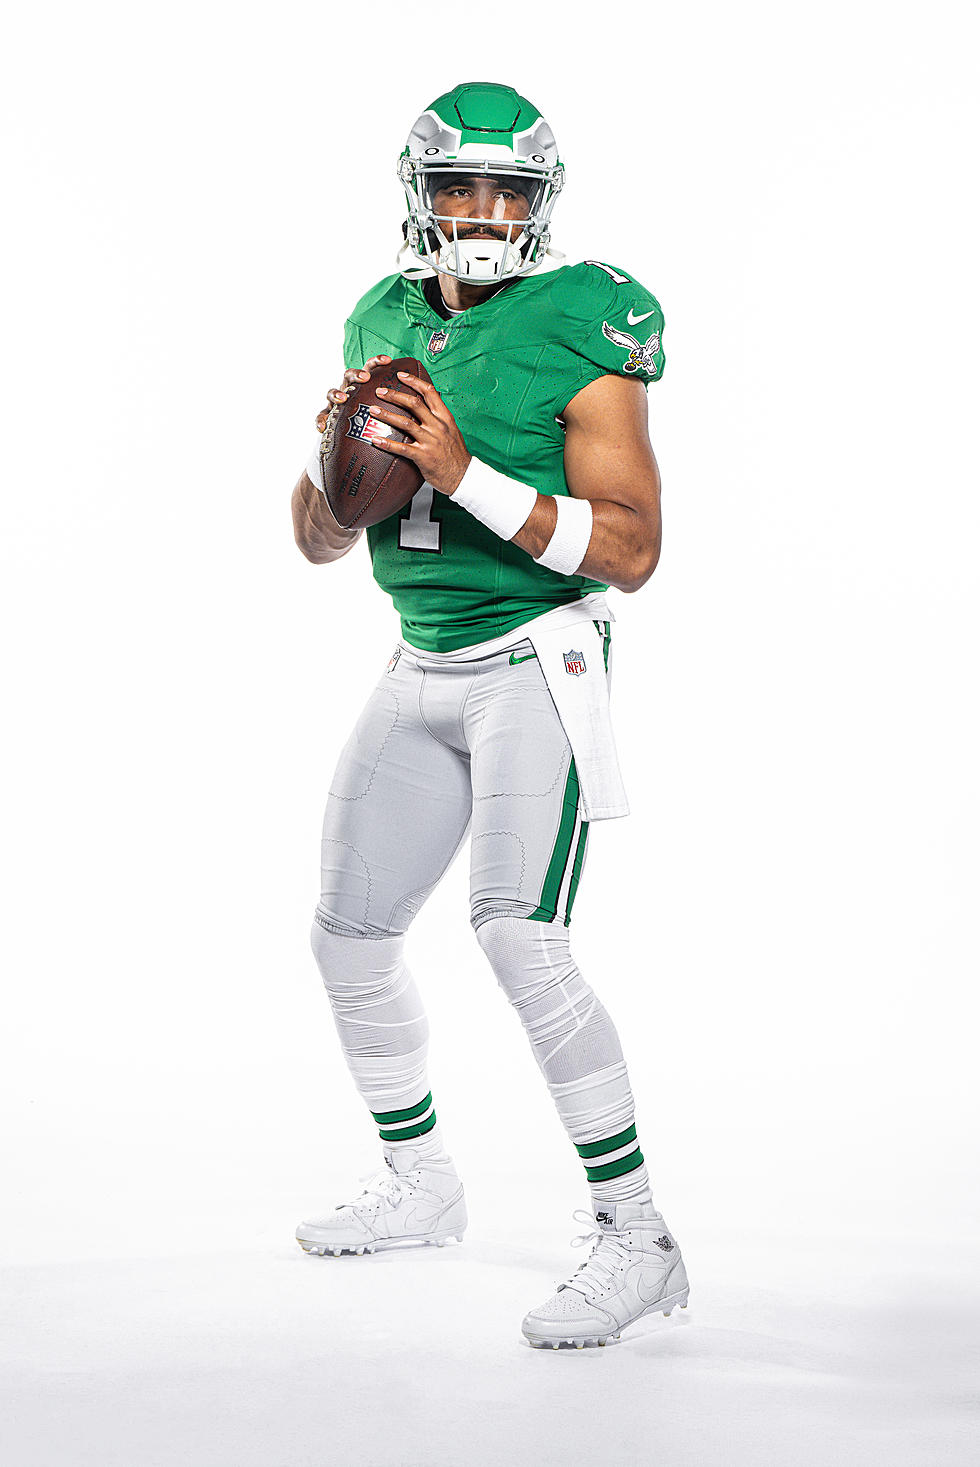 Eagles to Wear Kelly Green Uniforms for Two Games in 2023